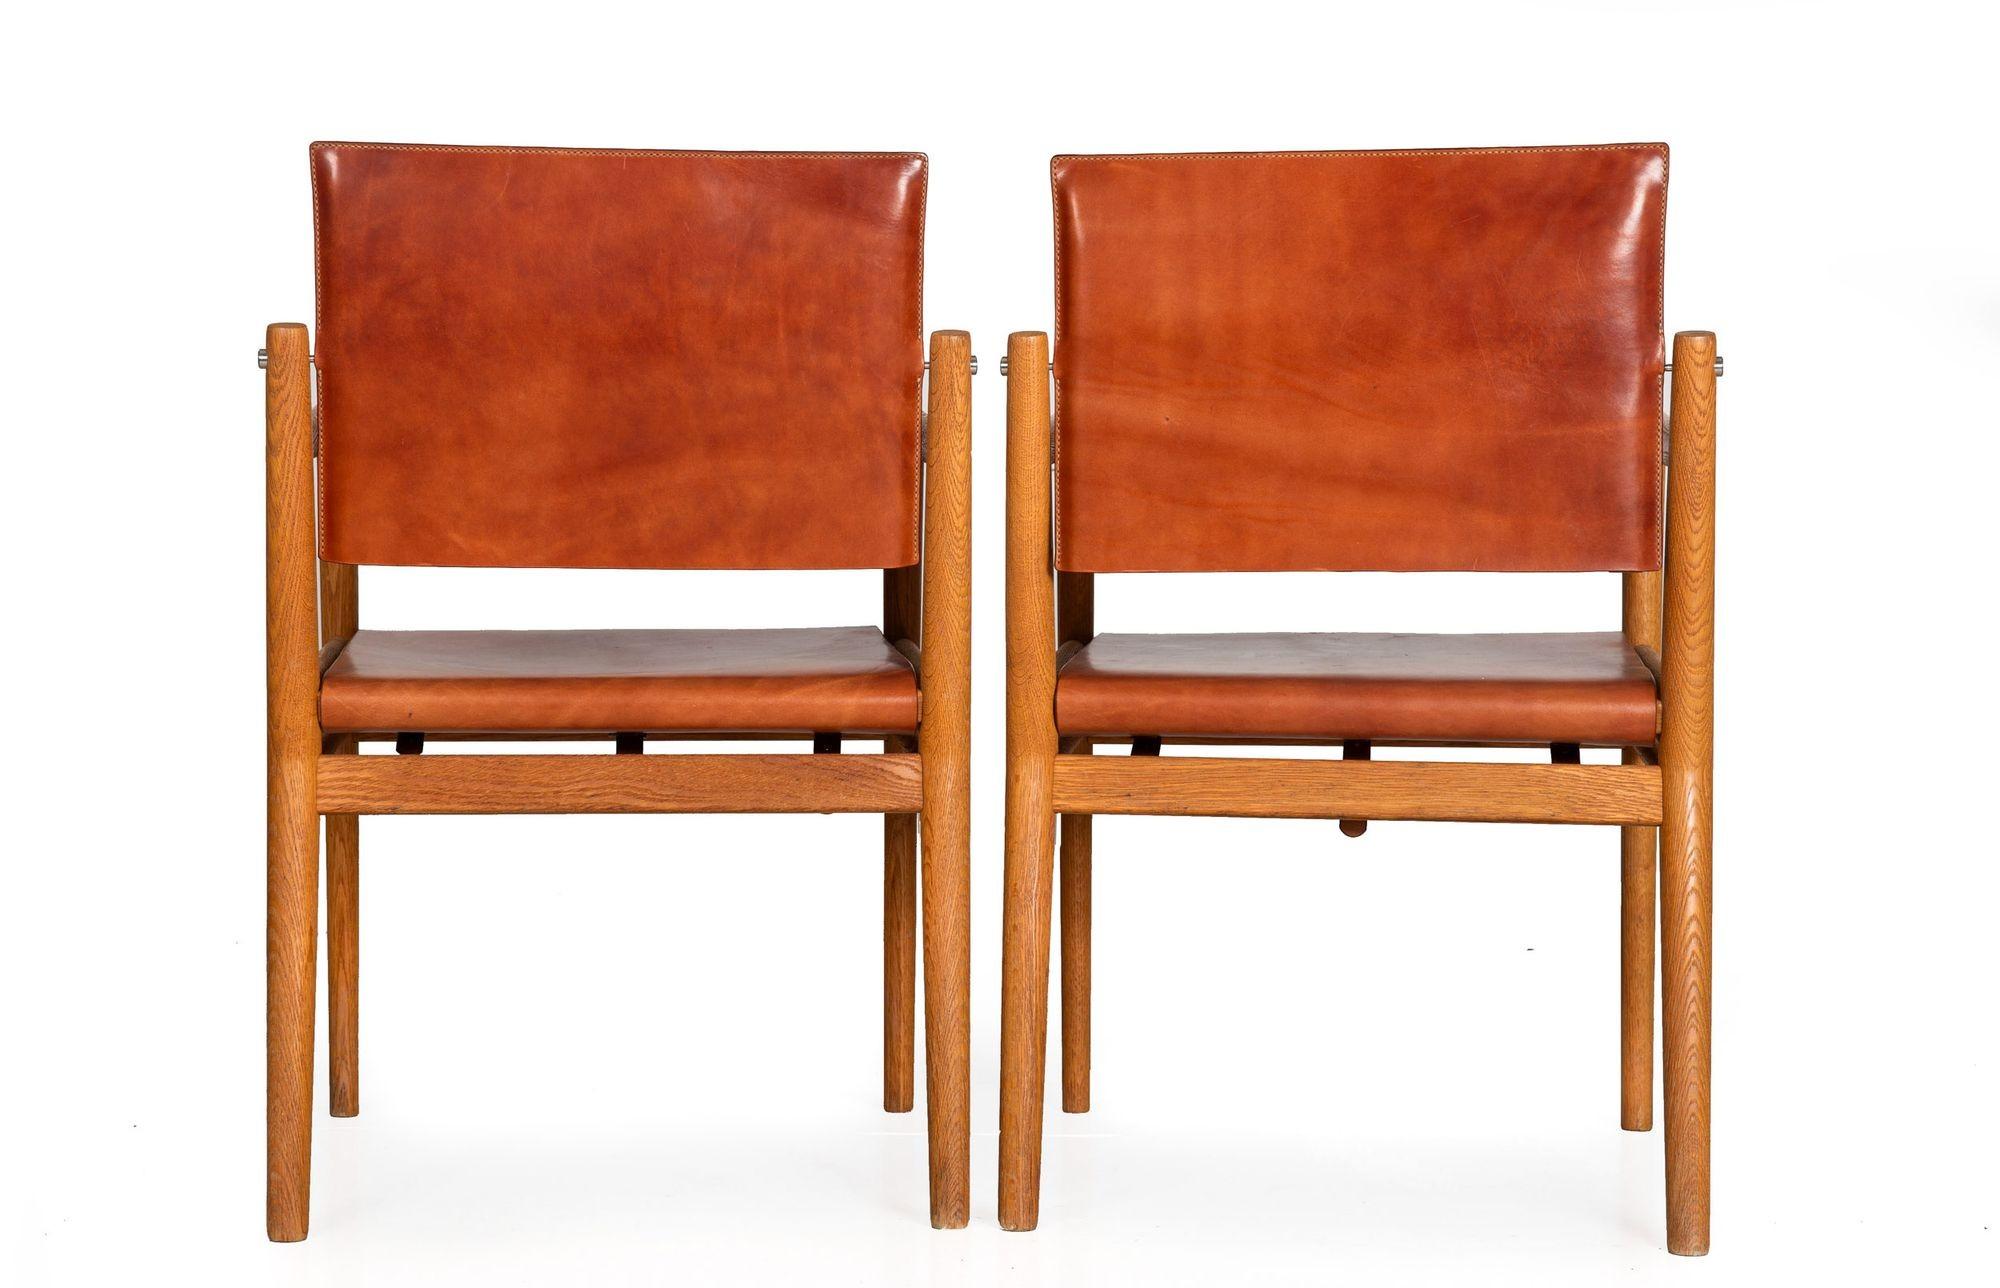 Pair of Wire-Brushed Oak and Leather Arm Chairs after Jean-Michel Frank In Good Condition For Sale In Shippensburg, PA